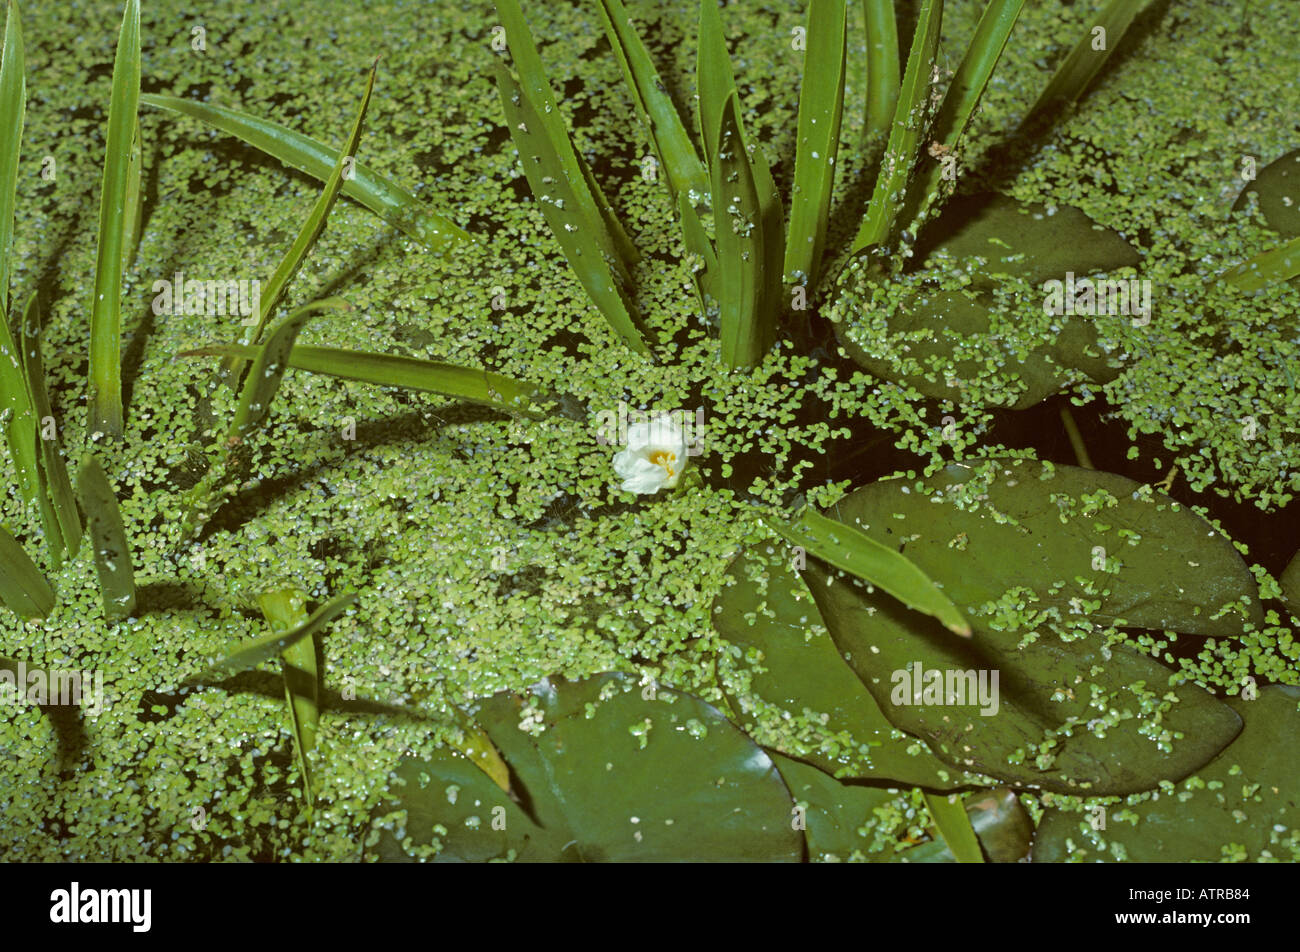 water soldier in flower in garden pond with duckweed covering water surface Stock Photo